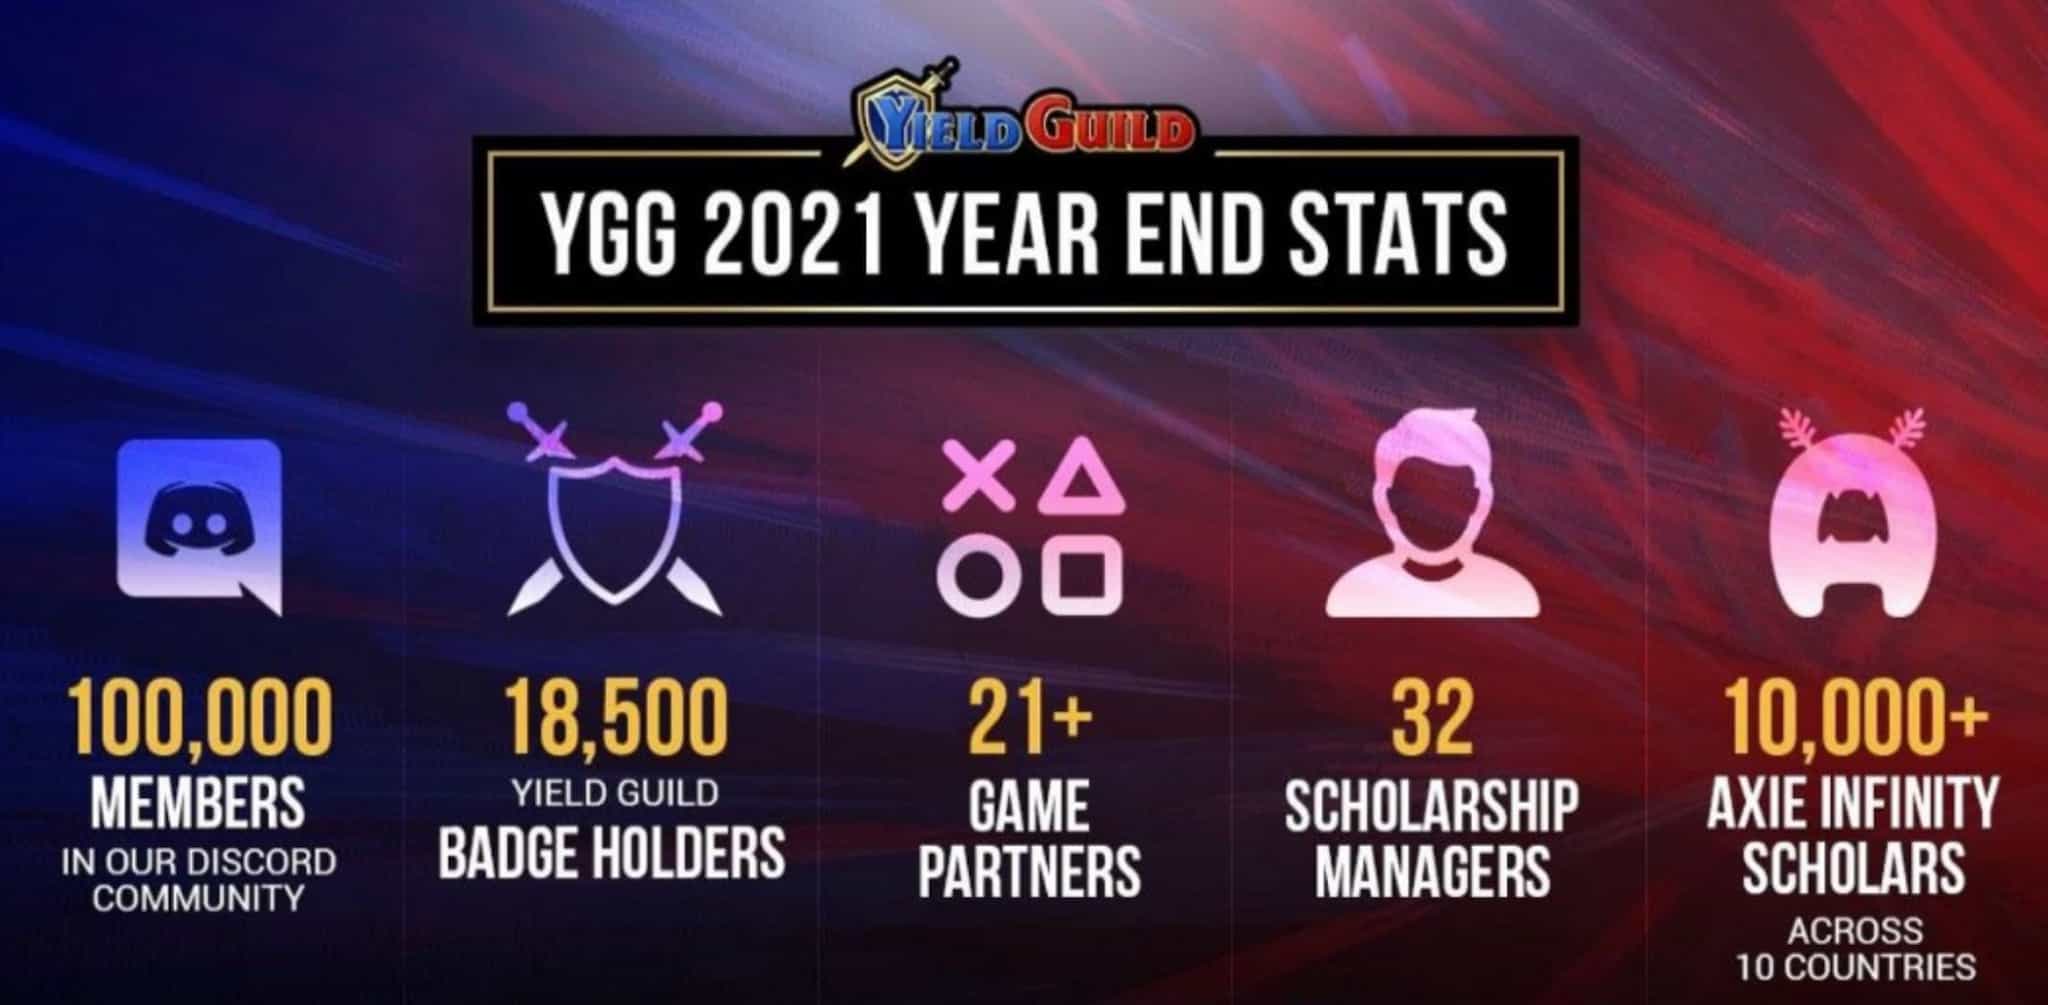 Yield Guild Games